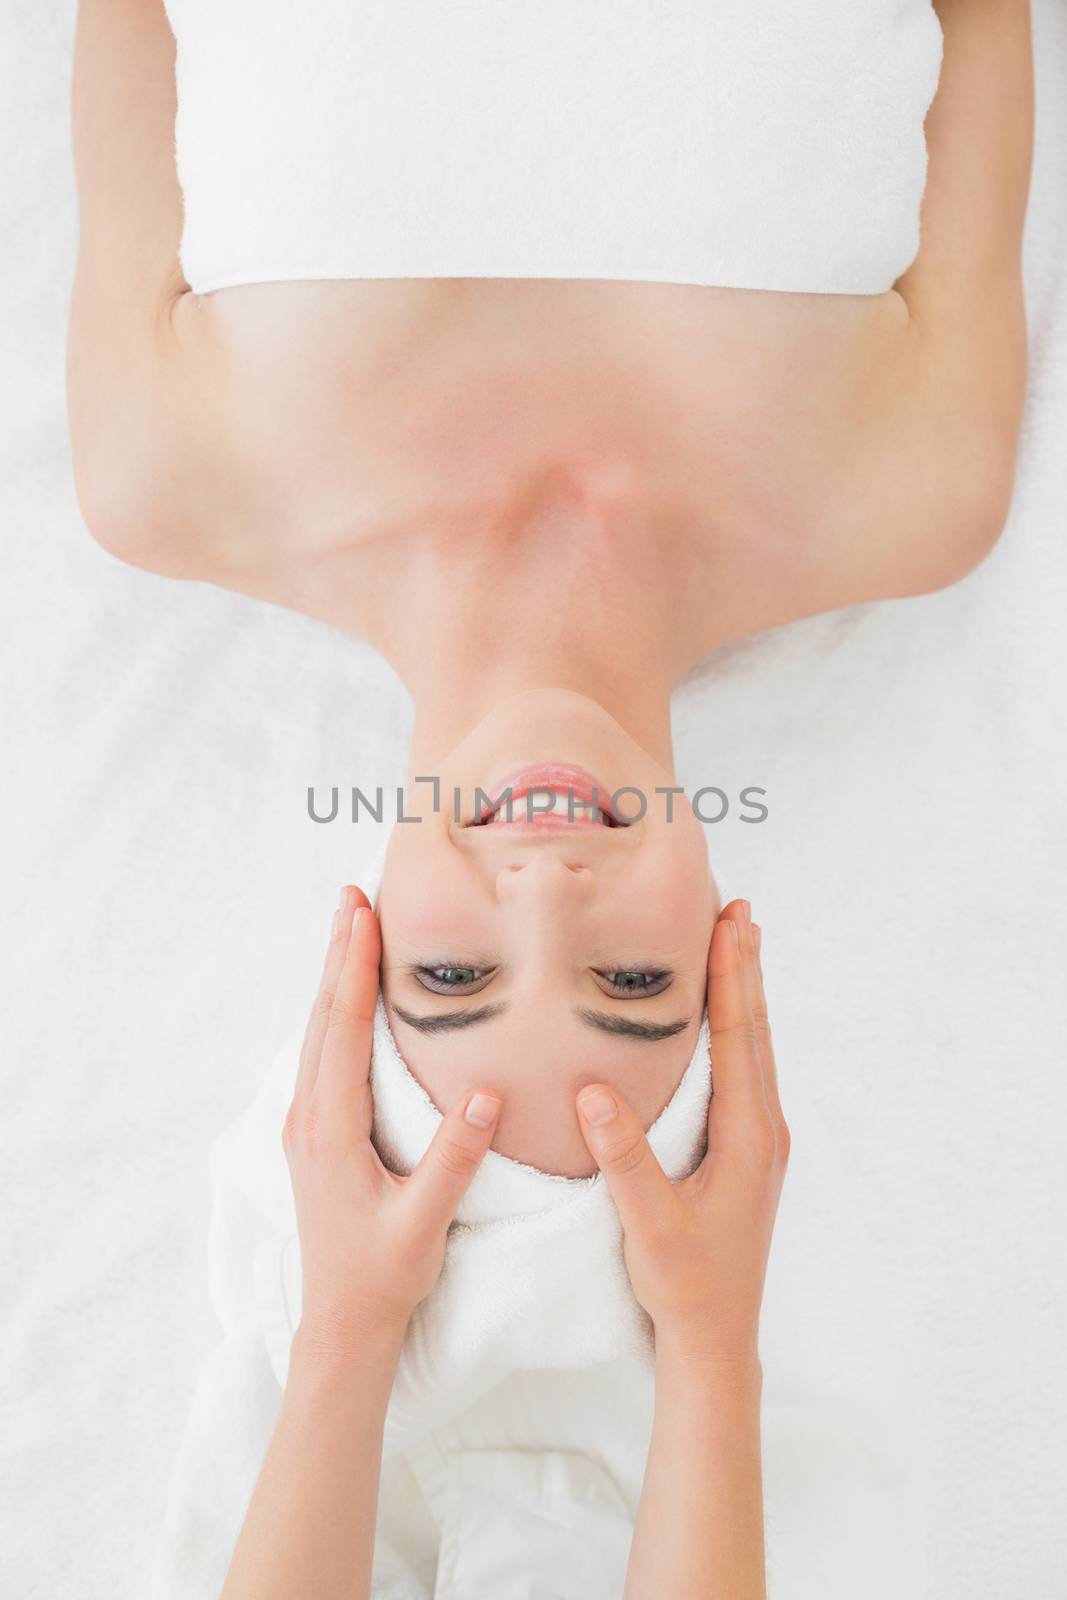 Close up of hands massaging a beautiful womans face at beauty spa